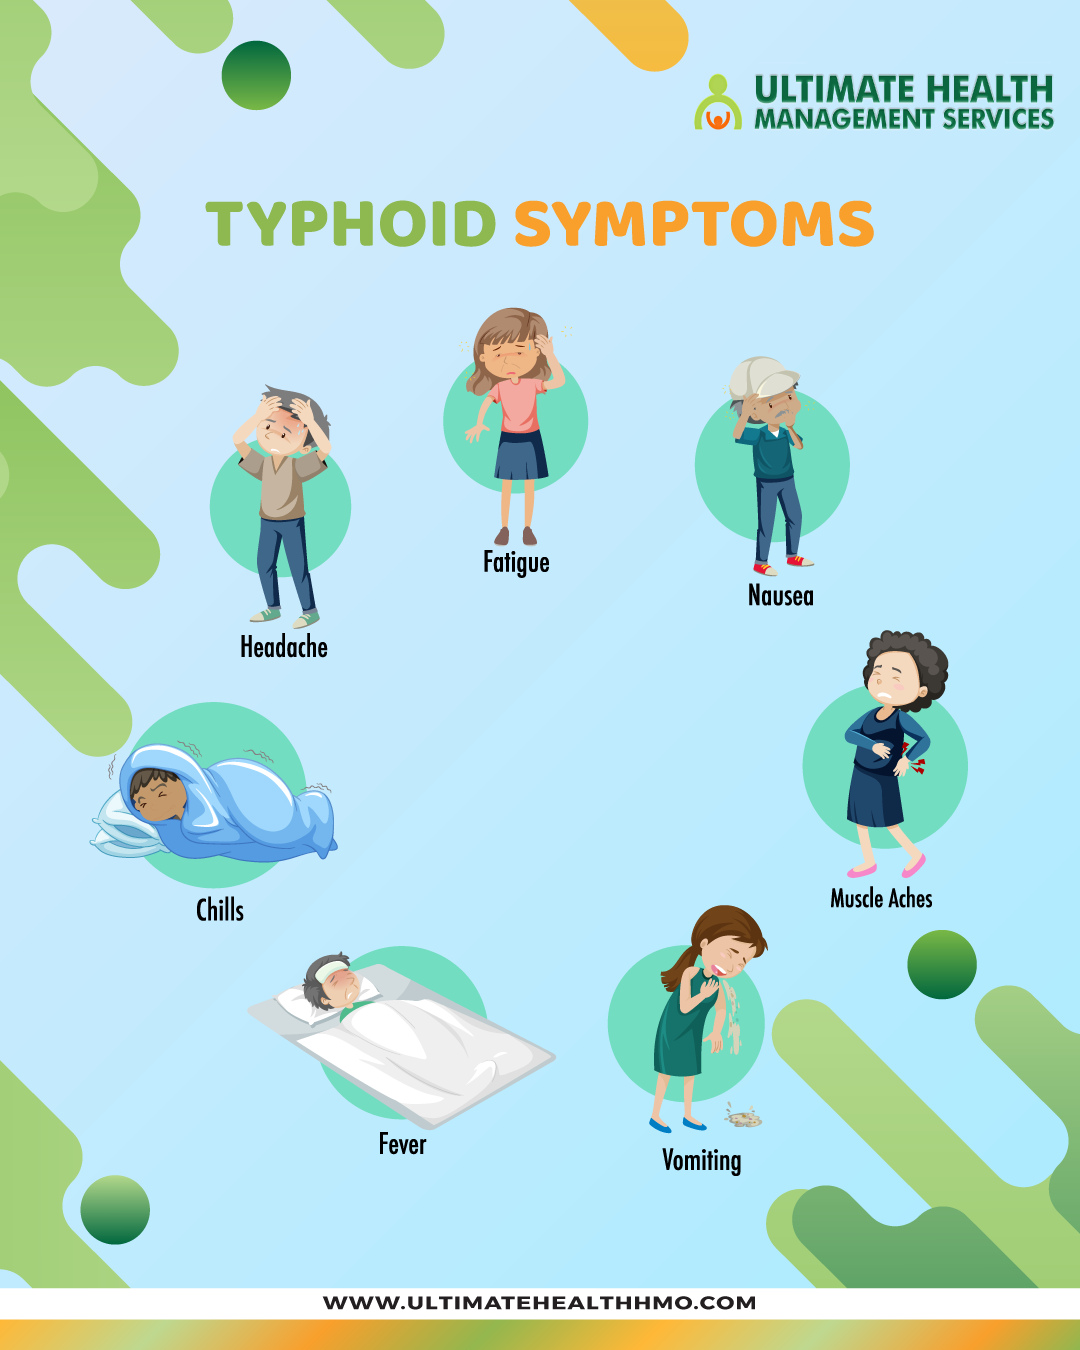 WHAT YOU NEED TO KNOW ABOUT TYPHOID FEVER